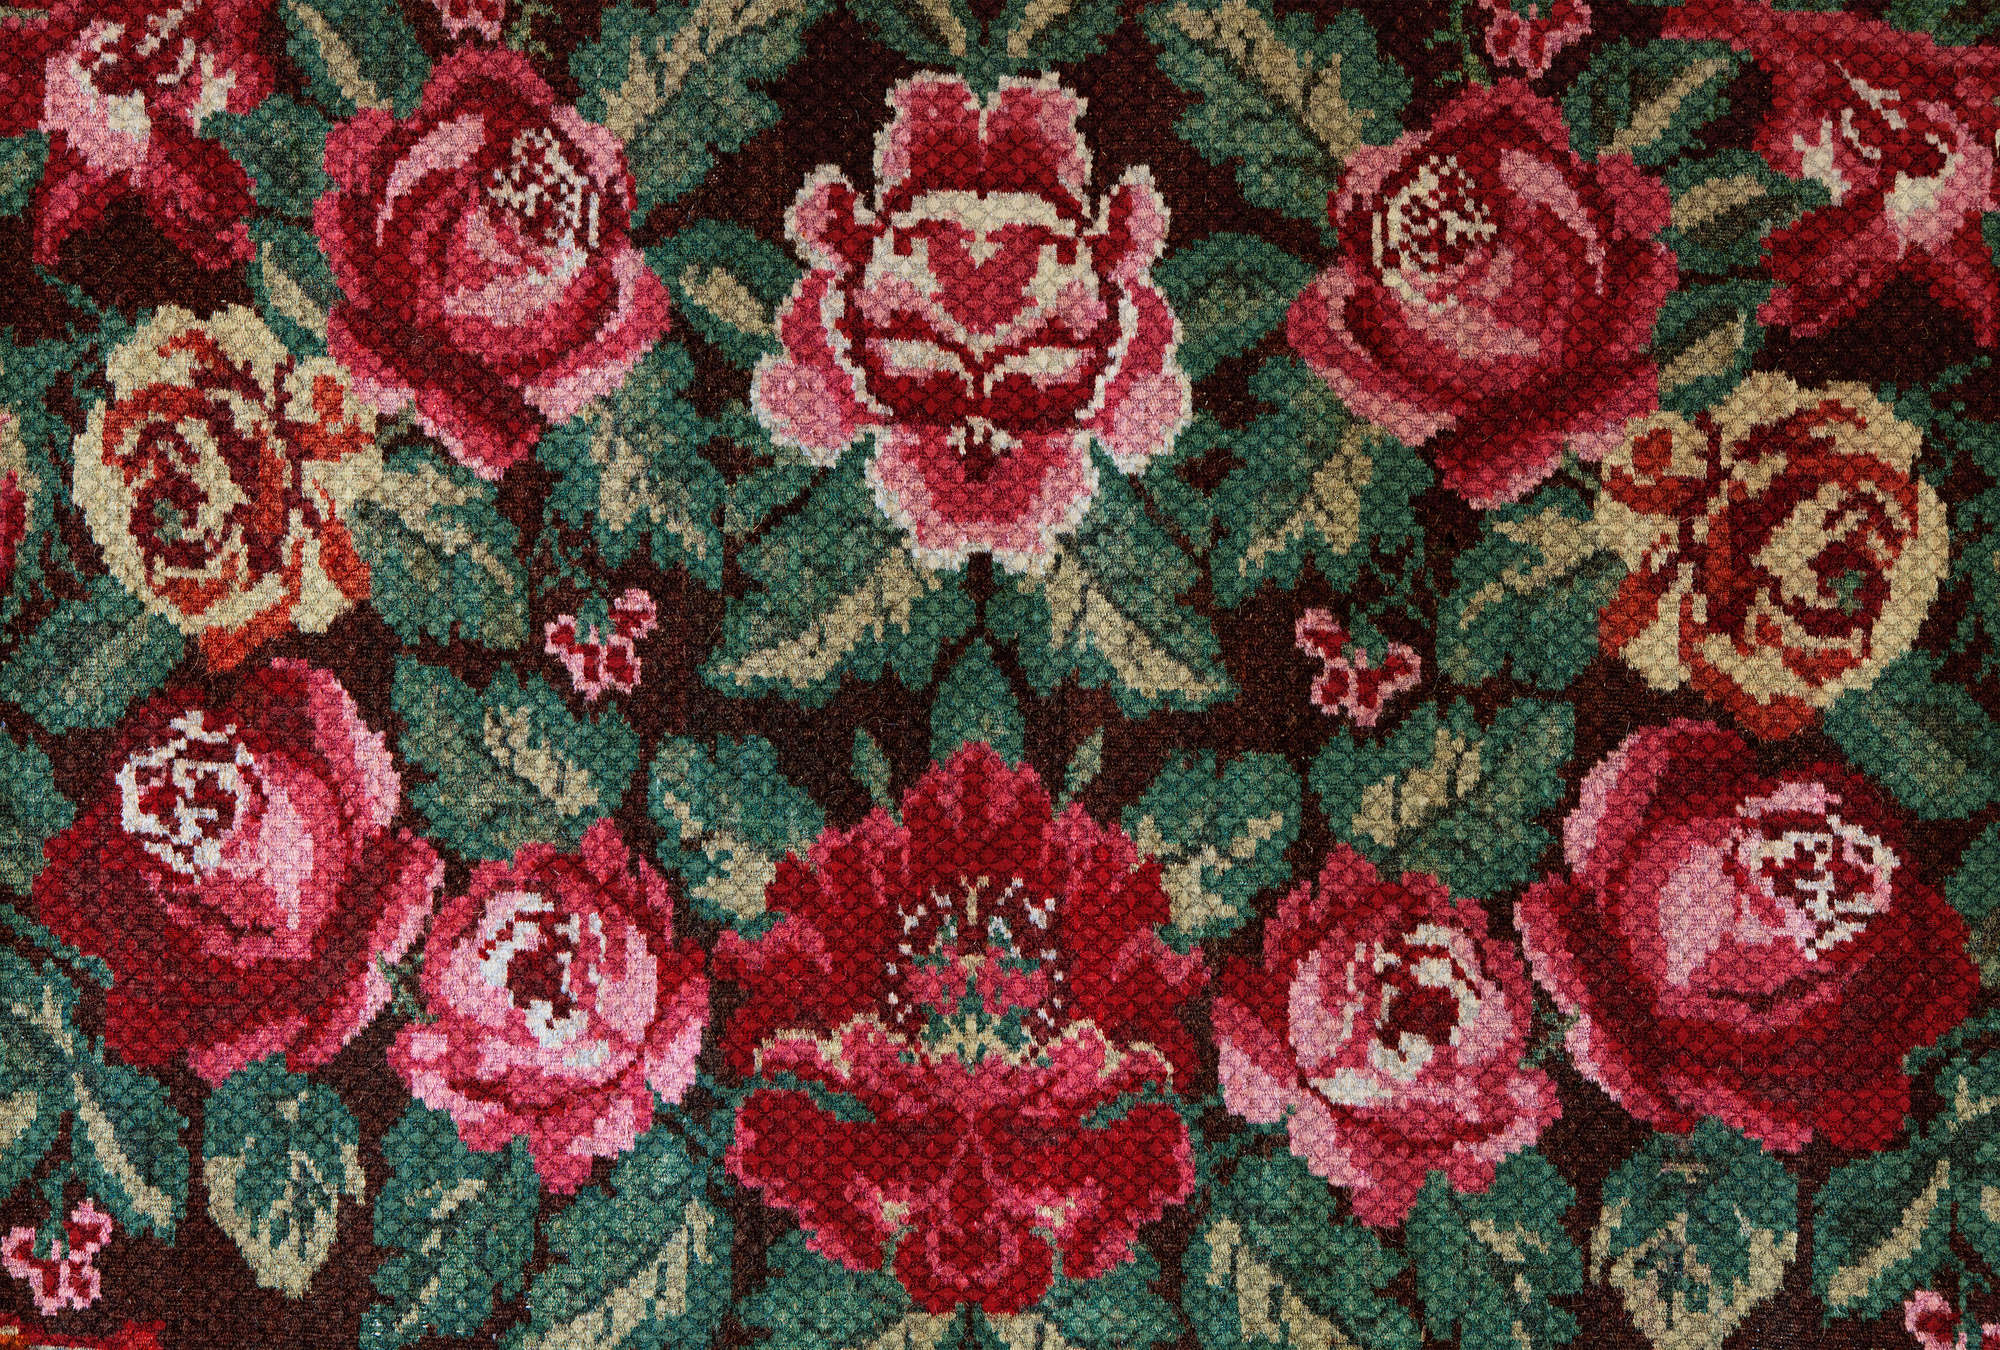             Roses mural in folklore style & retro design - pink, green, red
        